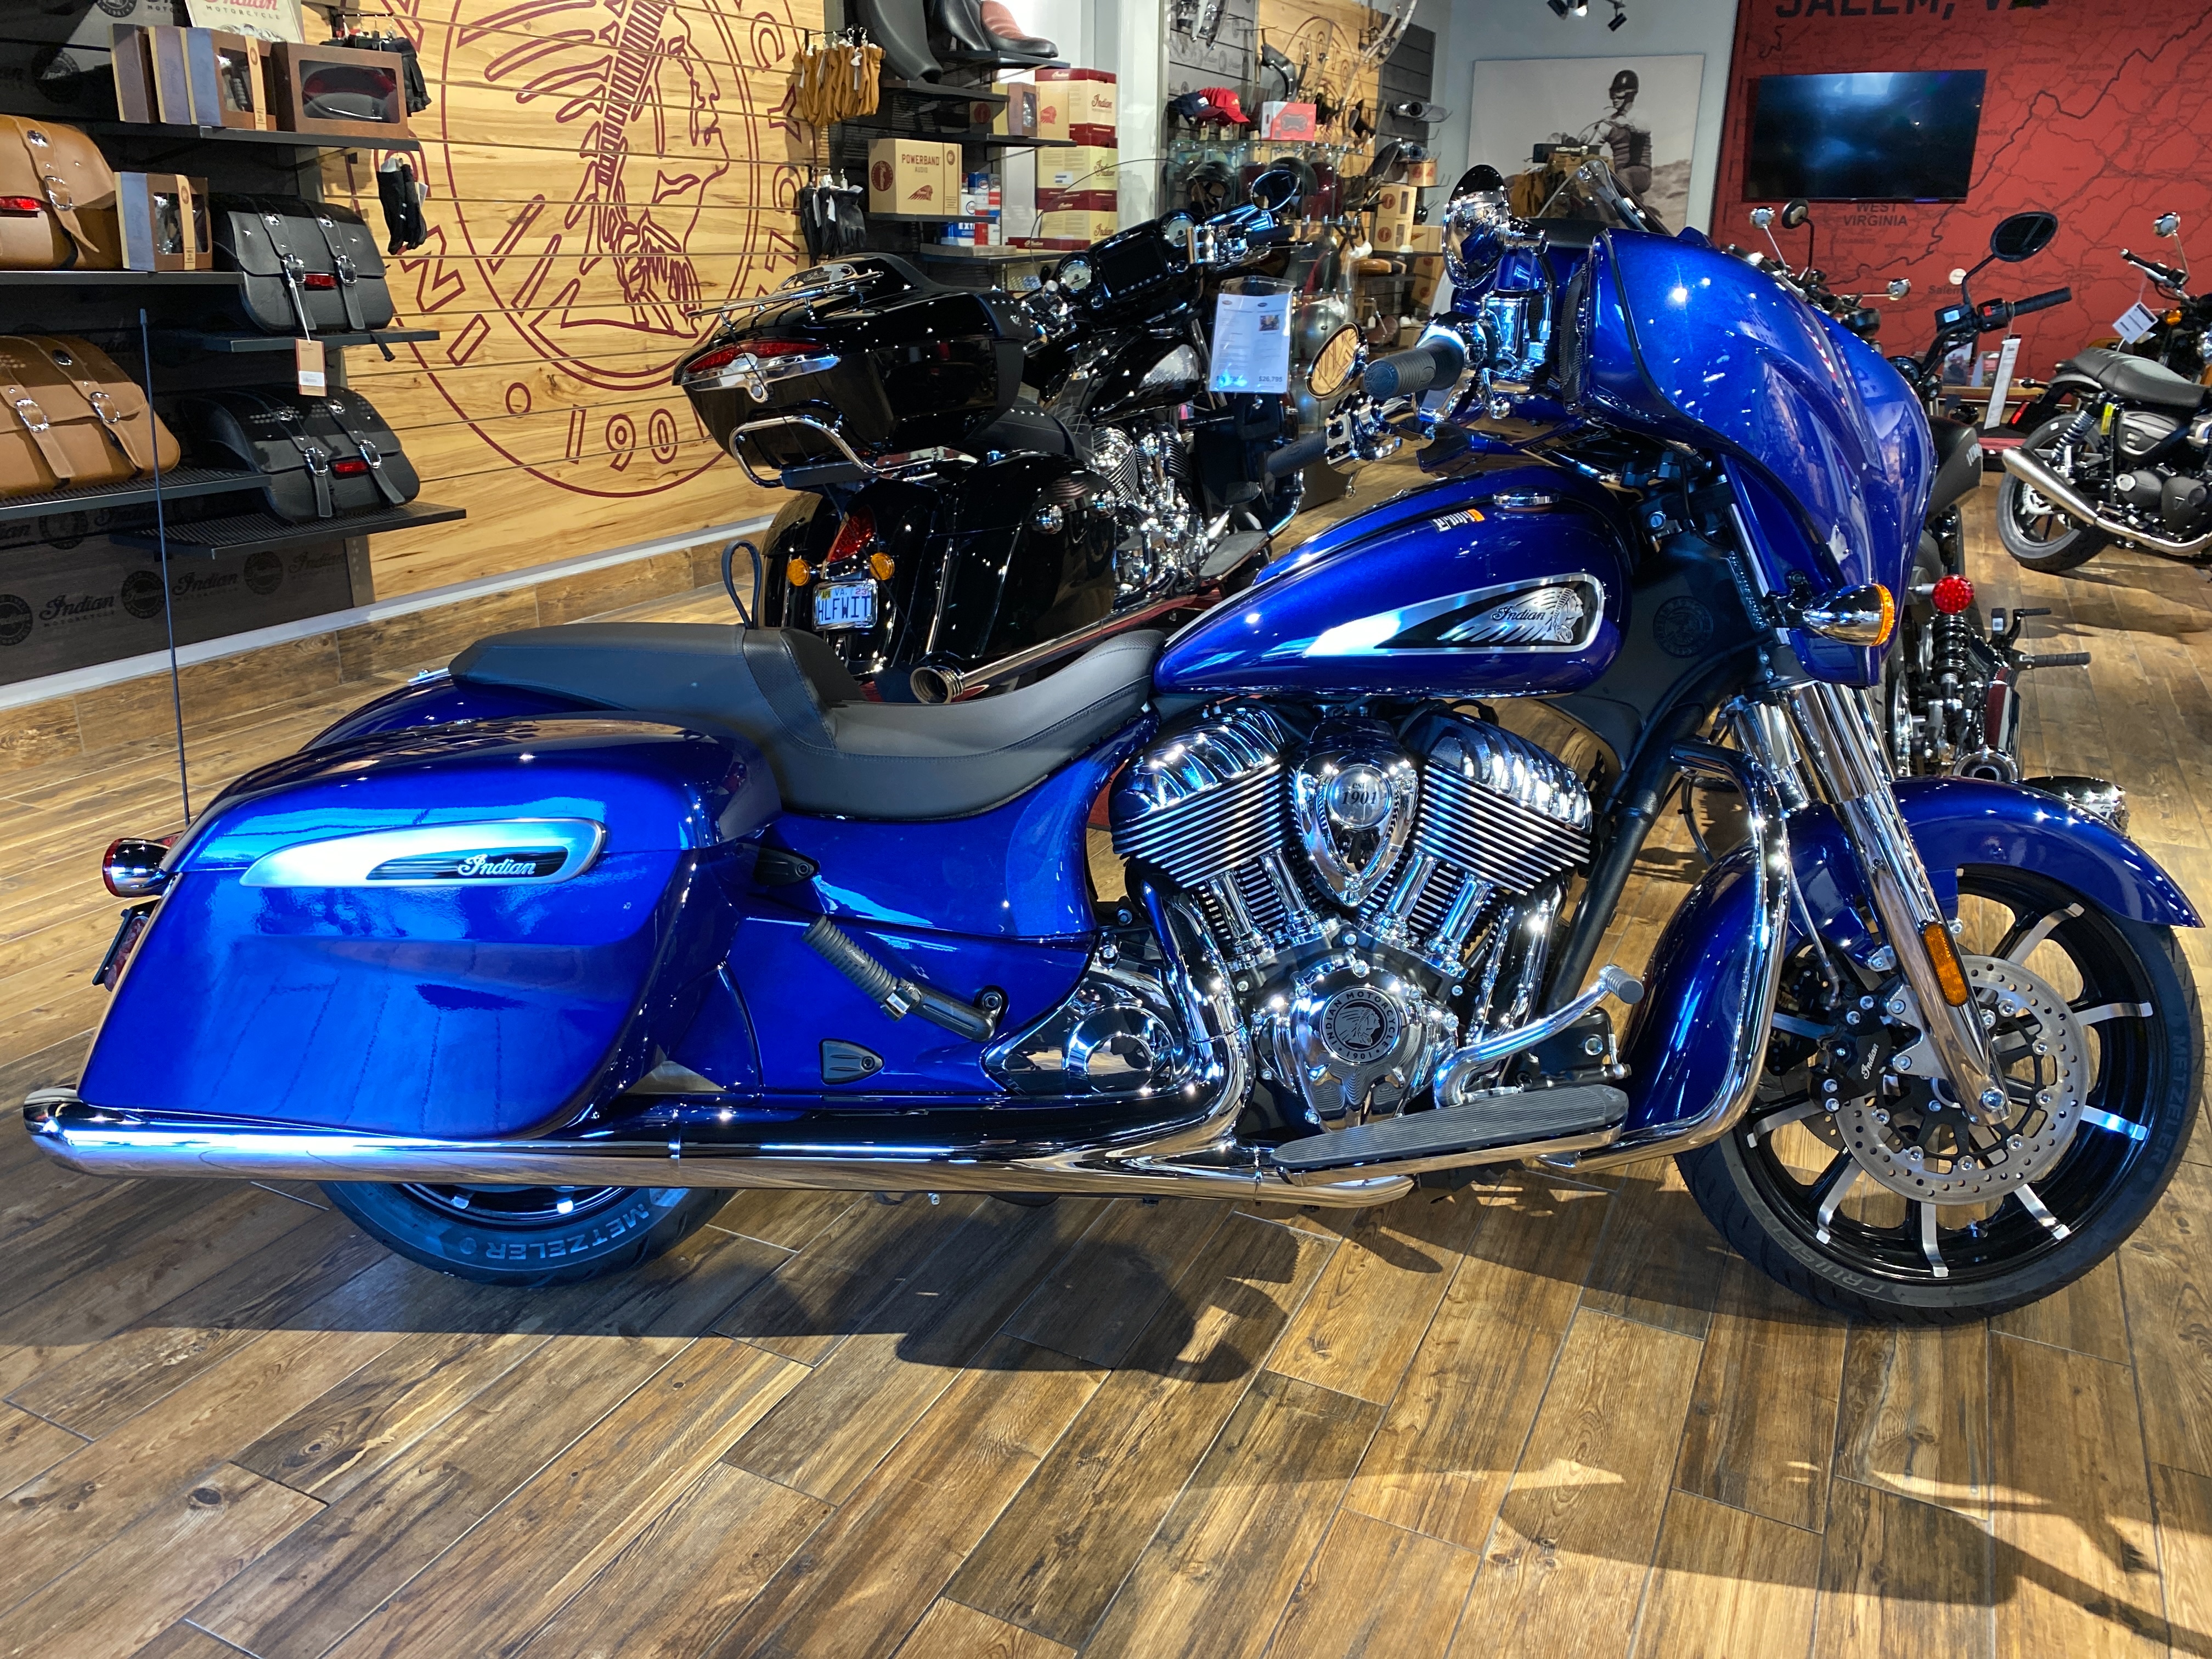 2022 Indian Chieftain Limited at Frontline Eurosports